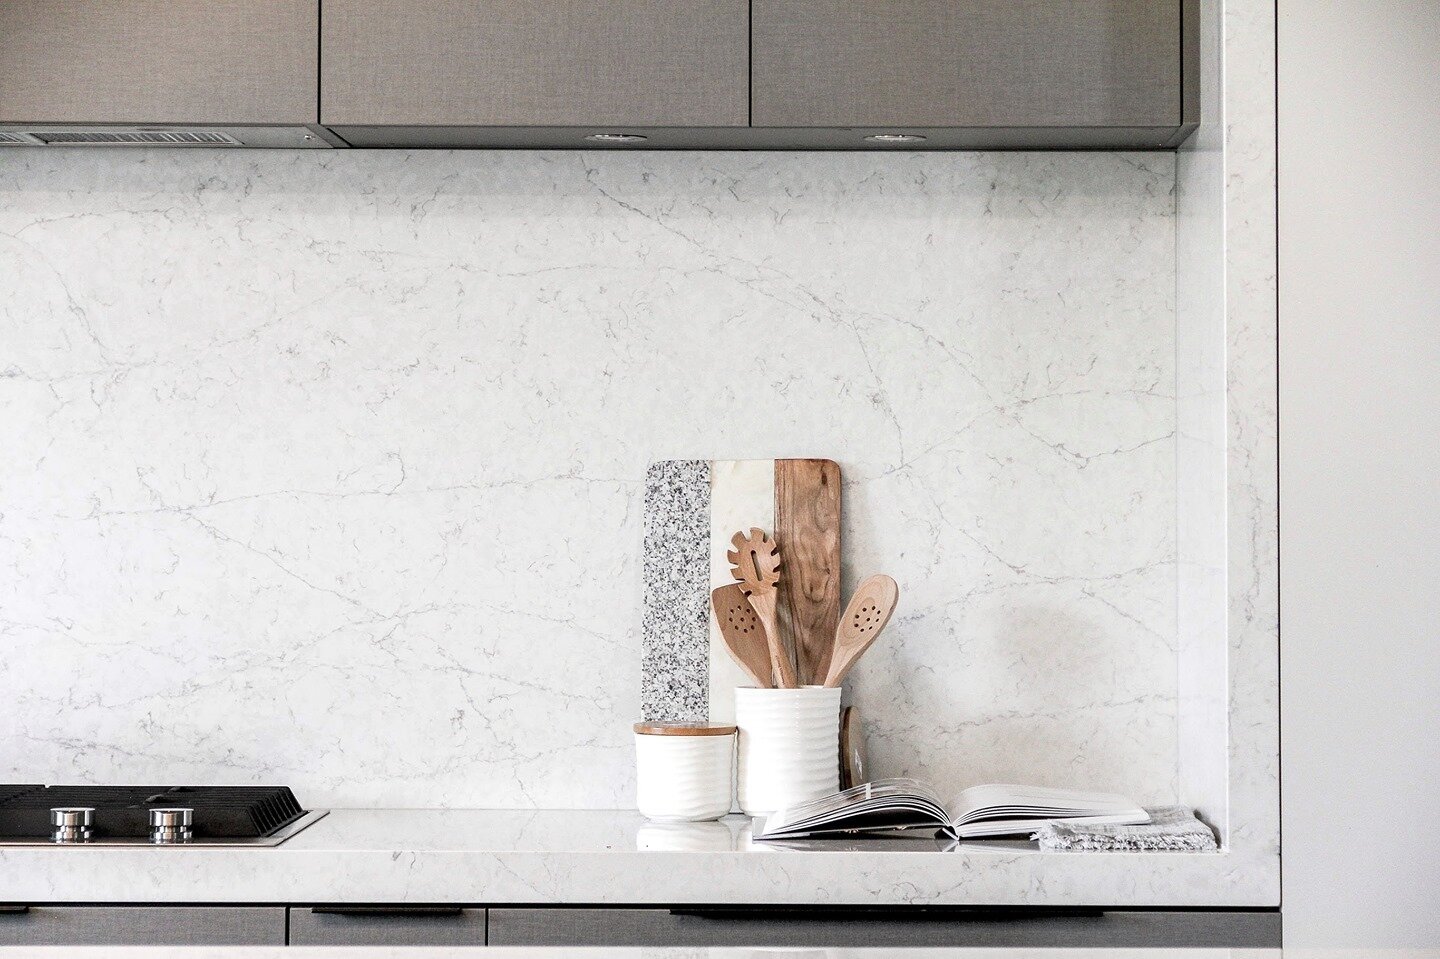 Have you visited our &quot;Natural Stone&quot; Page to see the pros and cons of using natural stones vs. man-made products? 
https://www.elegancemarble.ca/natural-stone
@elegancemarble #quartz #porcelain #marble #granite #quartzite #torontonewhomes #